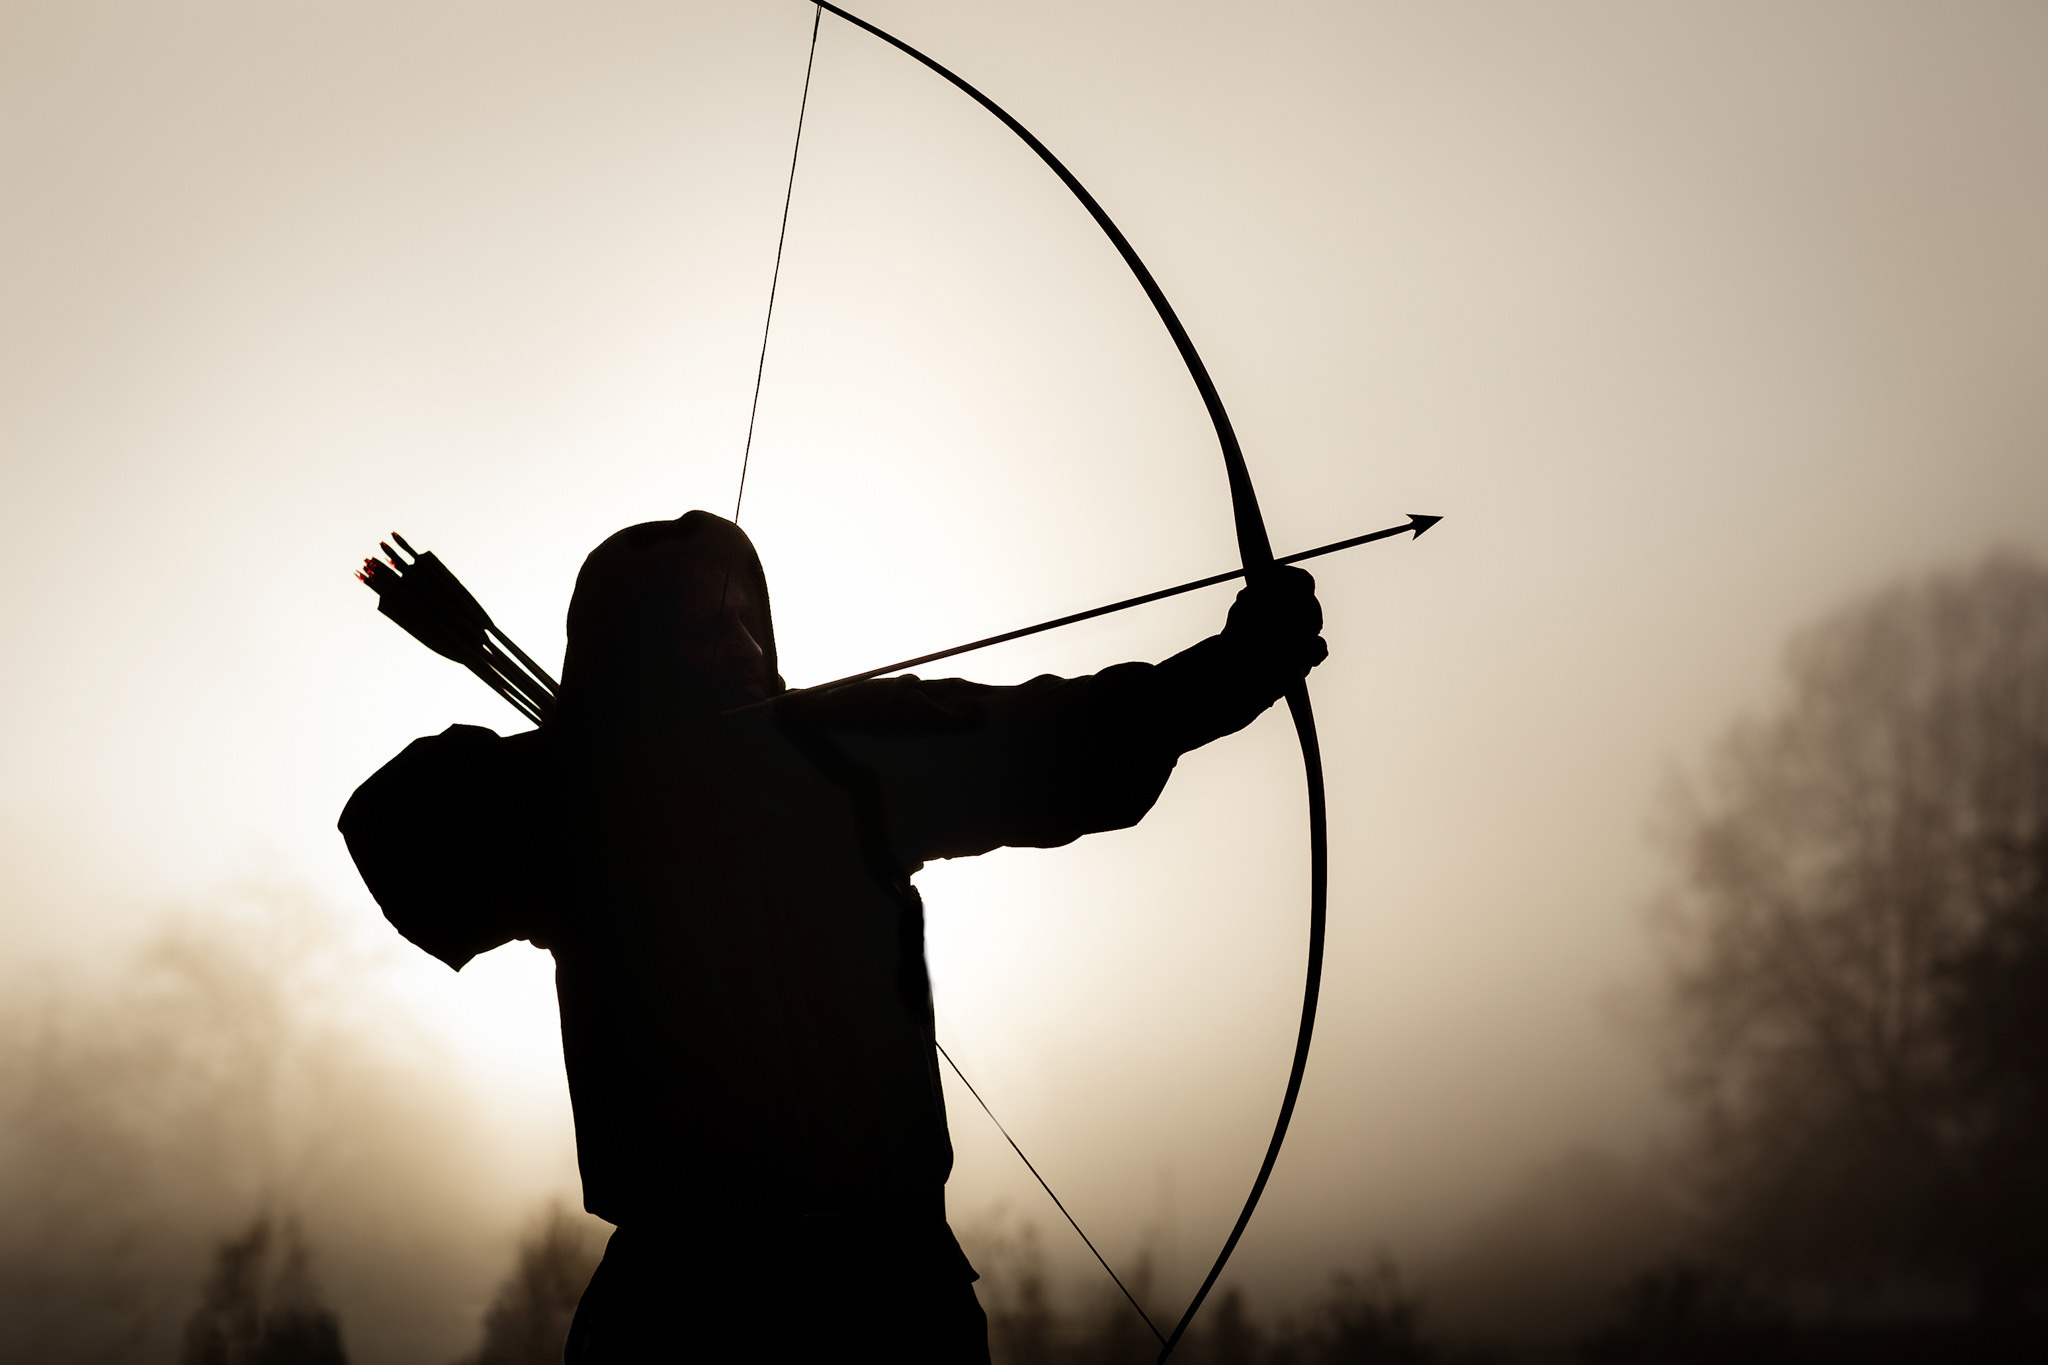 Download wallpaper background, bow, arrows, Archer, section men in  resolution 2048x1365